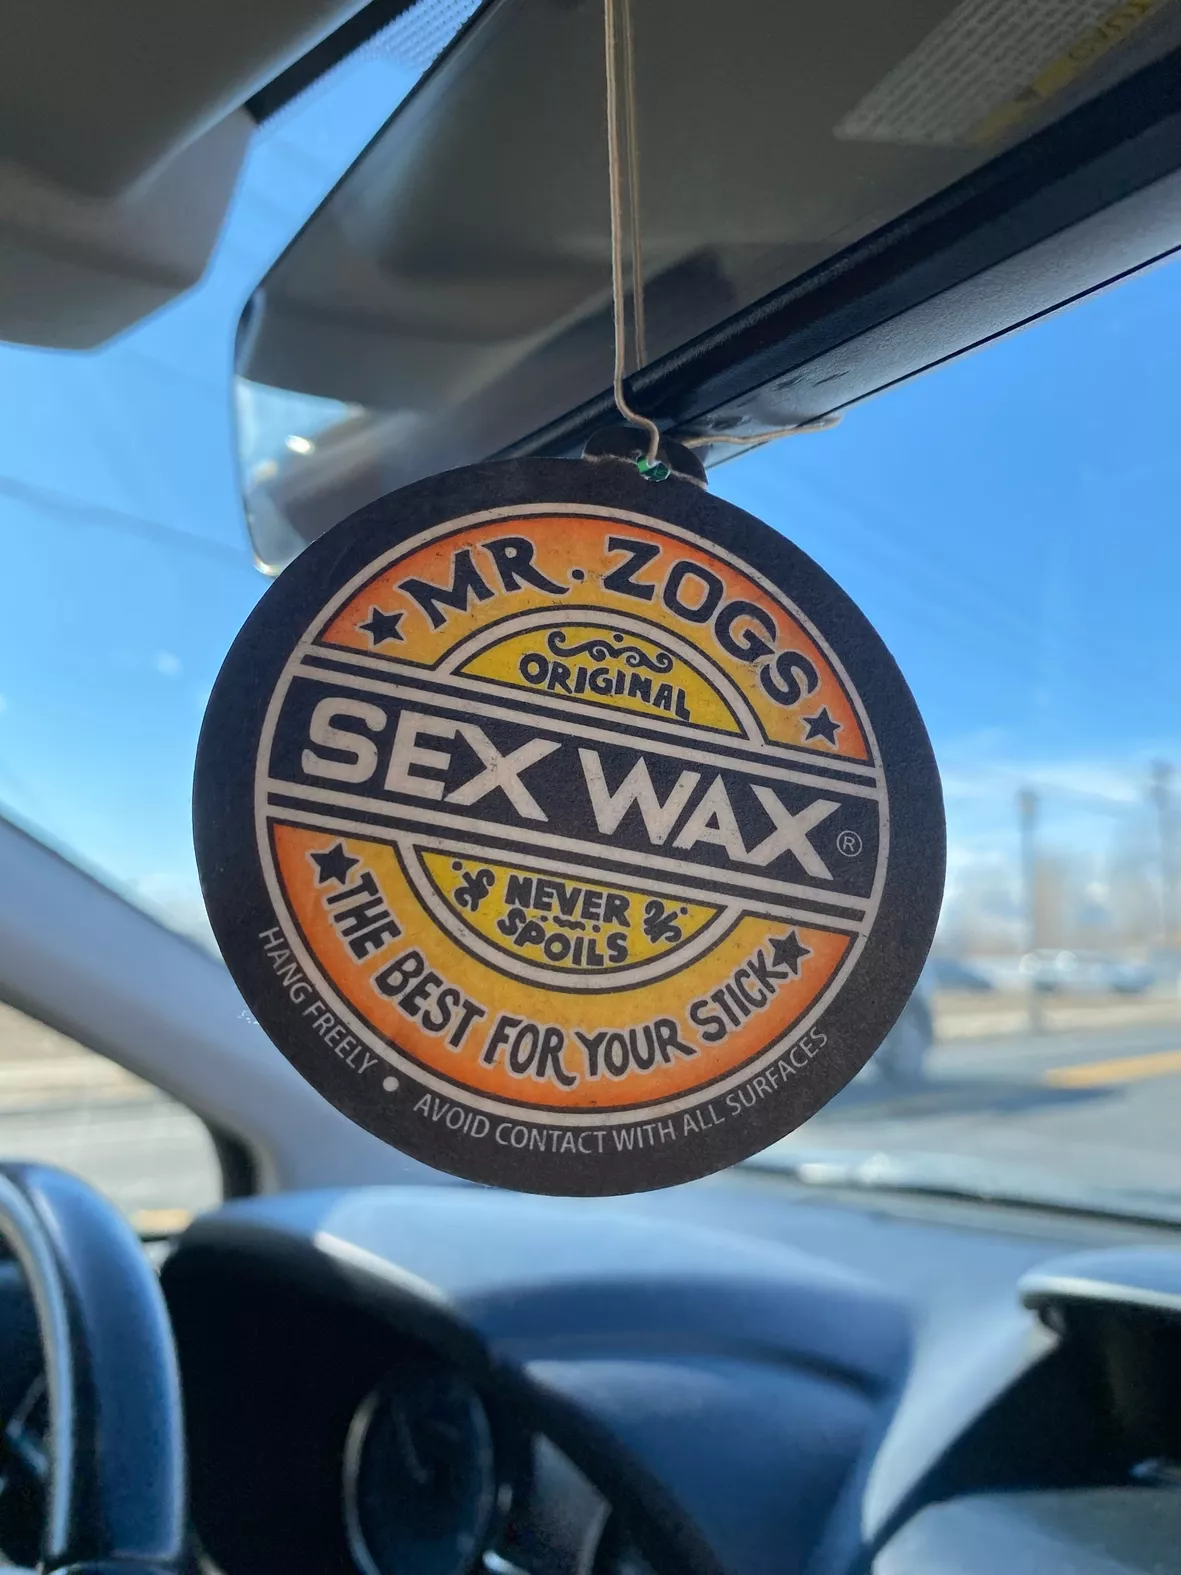  Sex Wax Air Freshener Multi Pack (Coconut 2 Pack) : Automotive